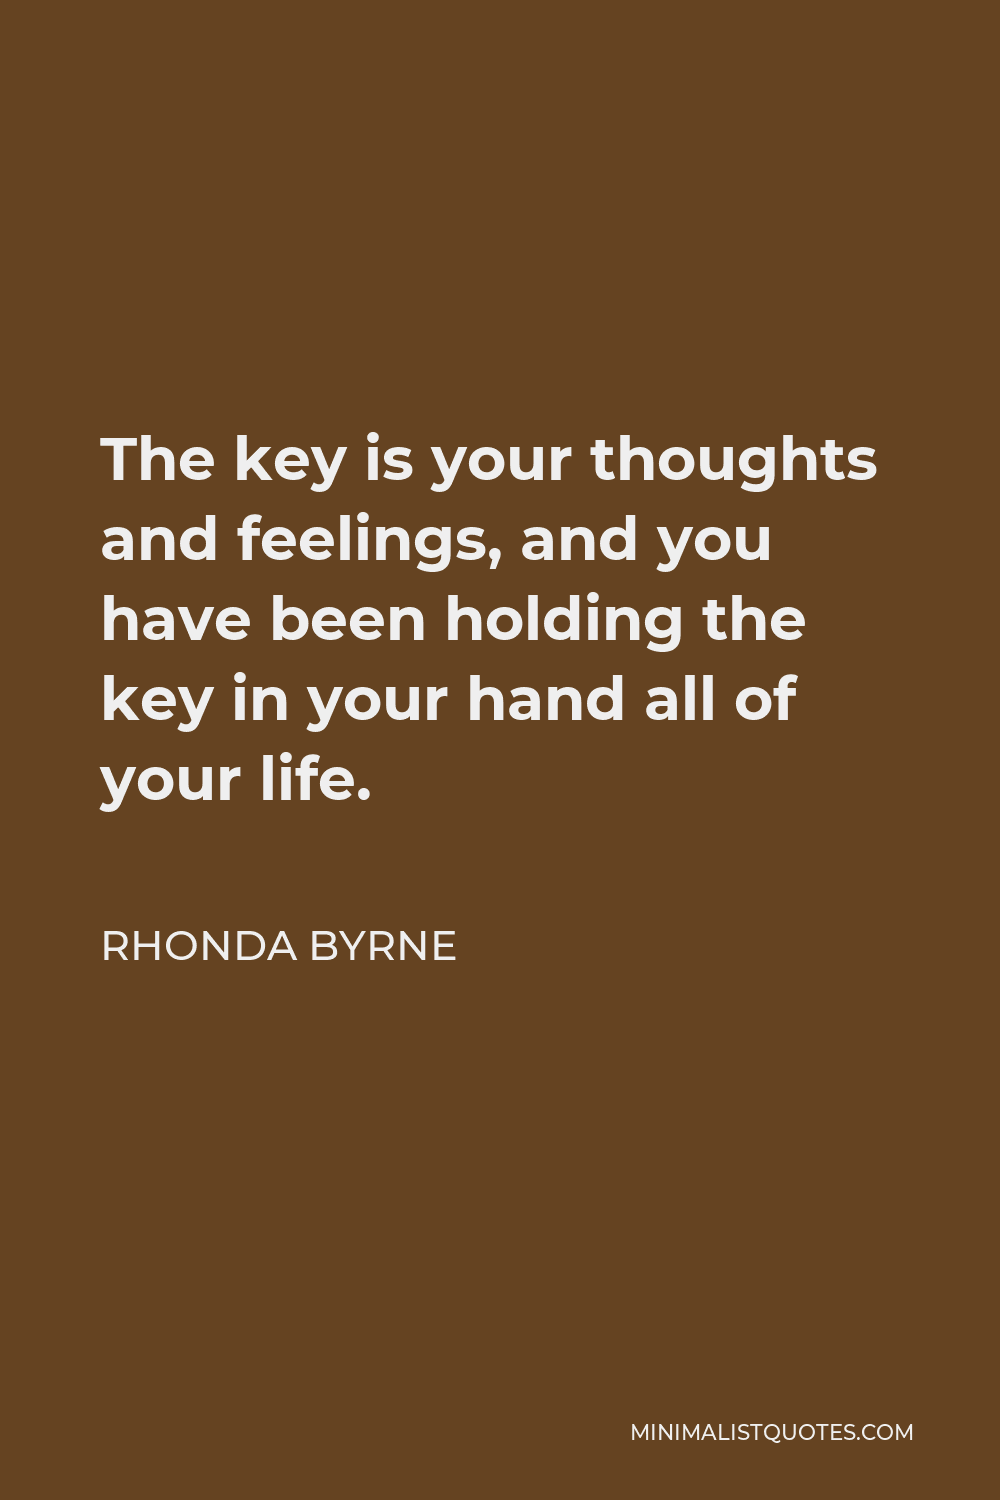 Rhonda Byrne Quote - The key is your thoughts and feelings, and you have been holding the key in your hand all of your life.